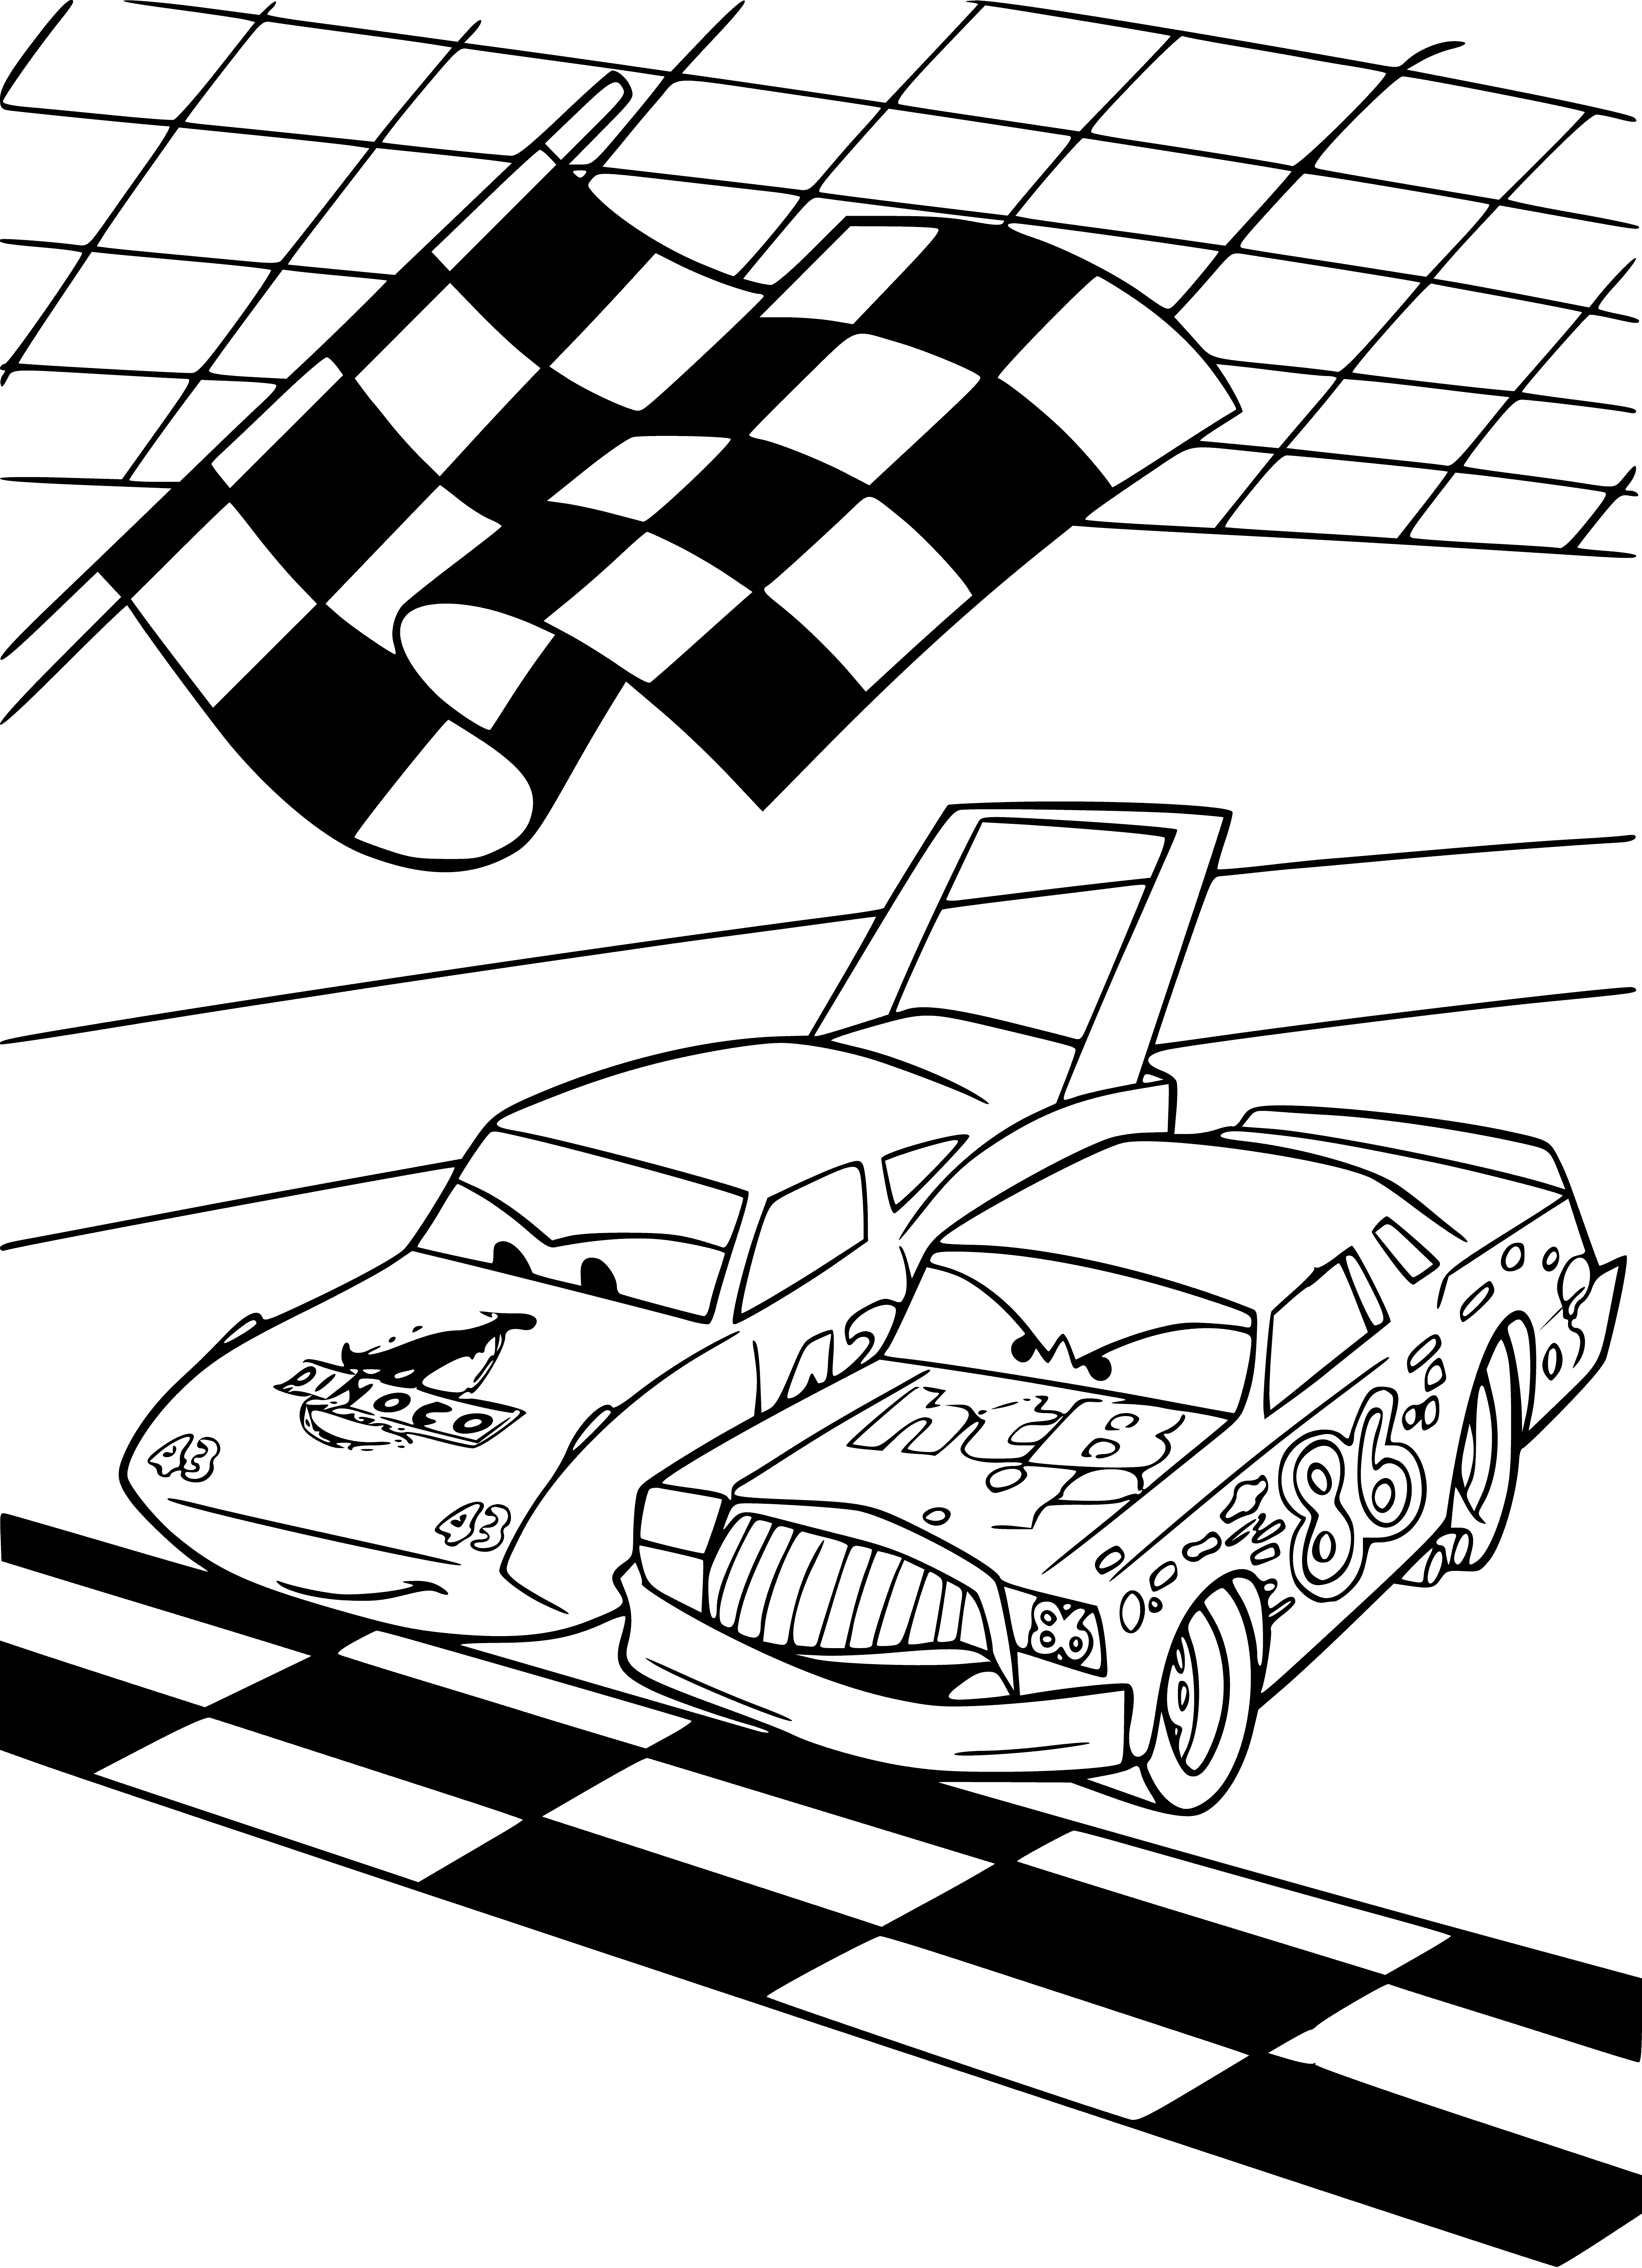 The finish coloring page